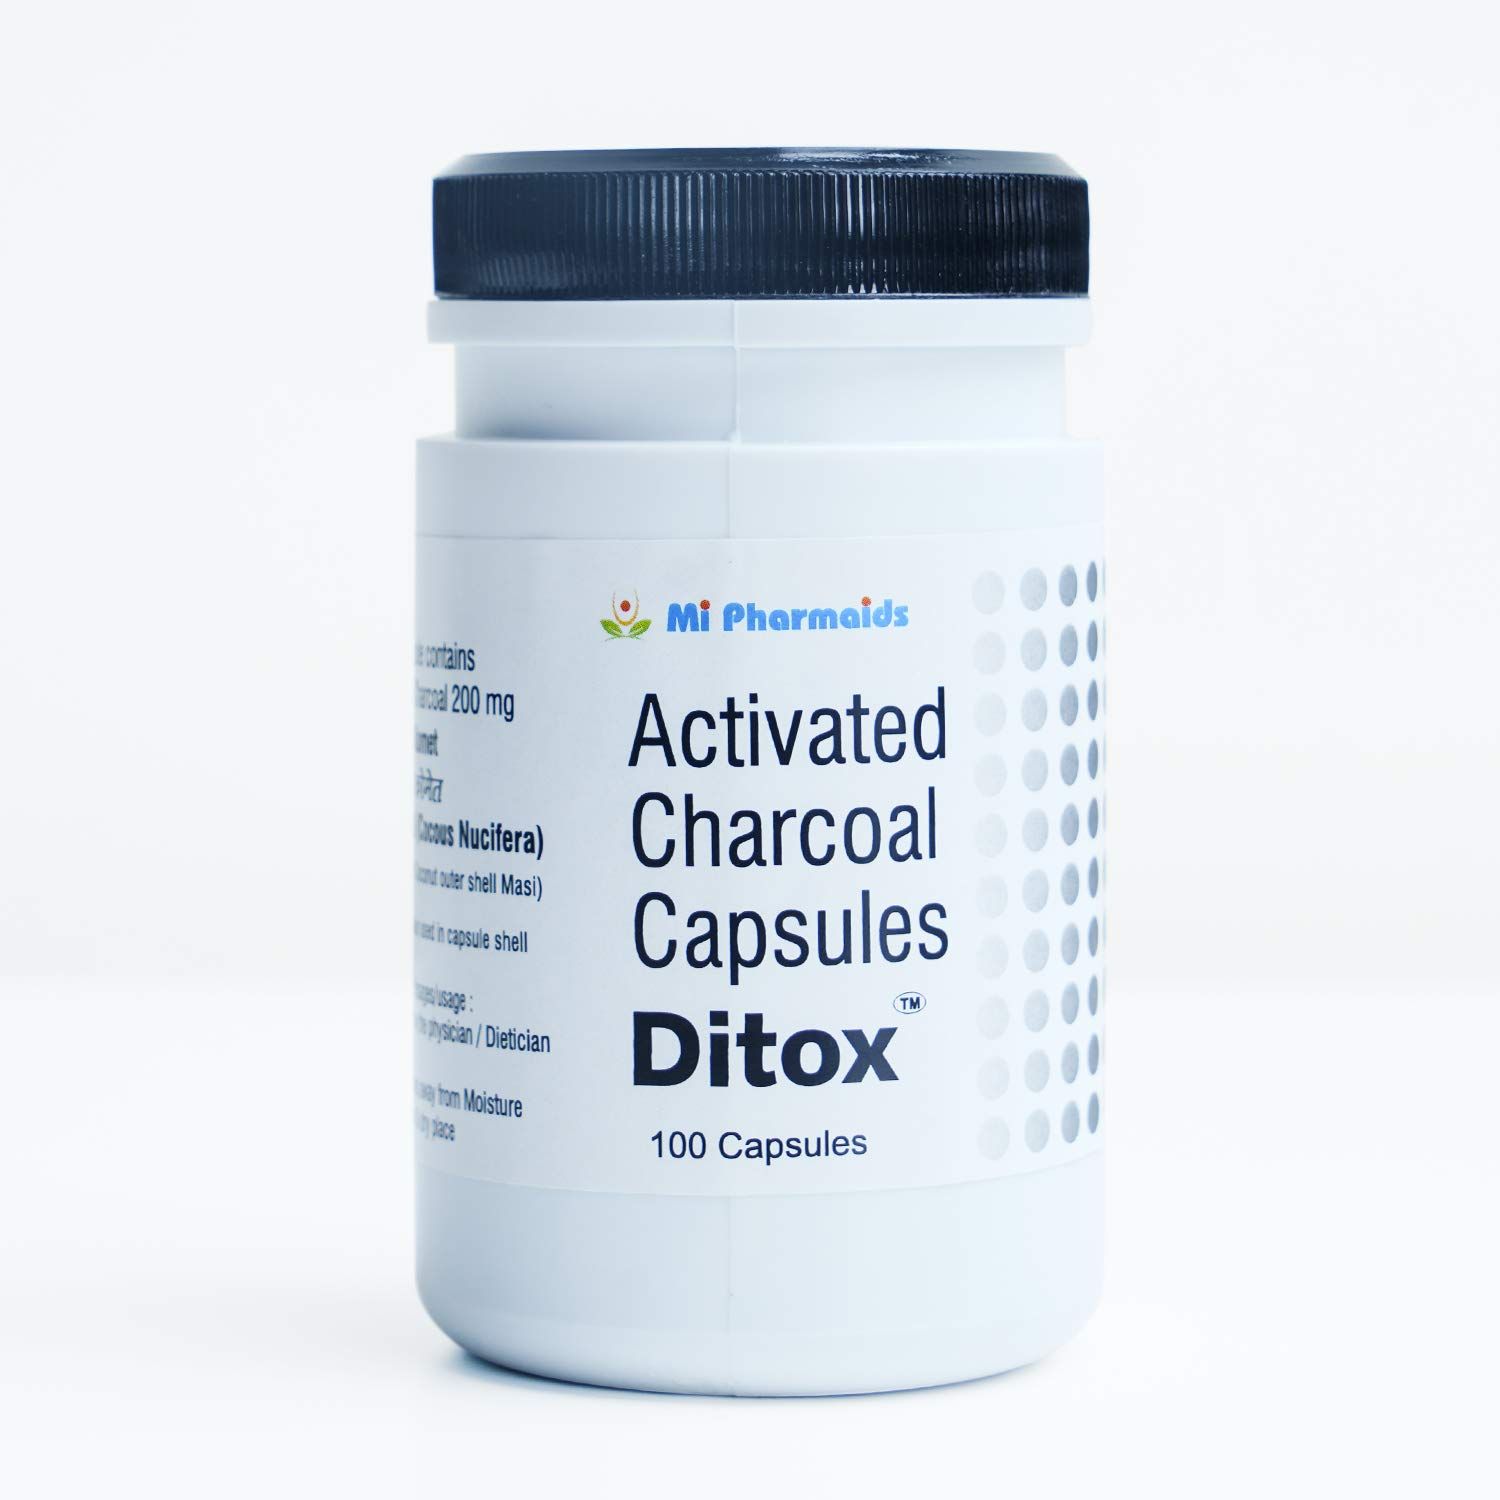 Ditox Capsule Activated Charcoal Image